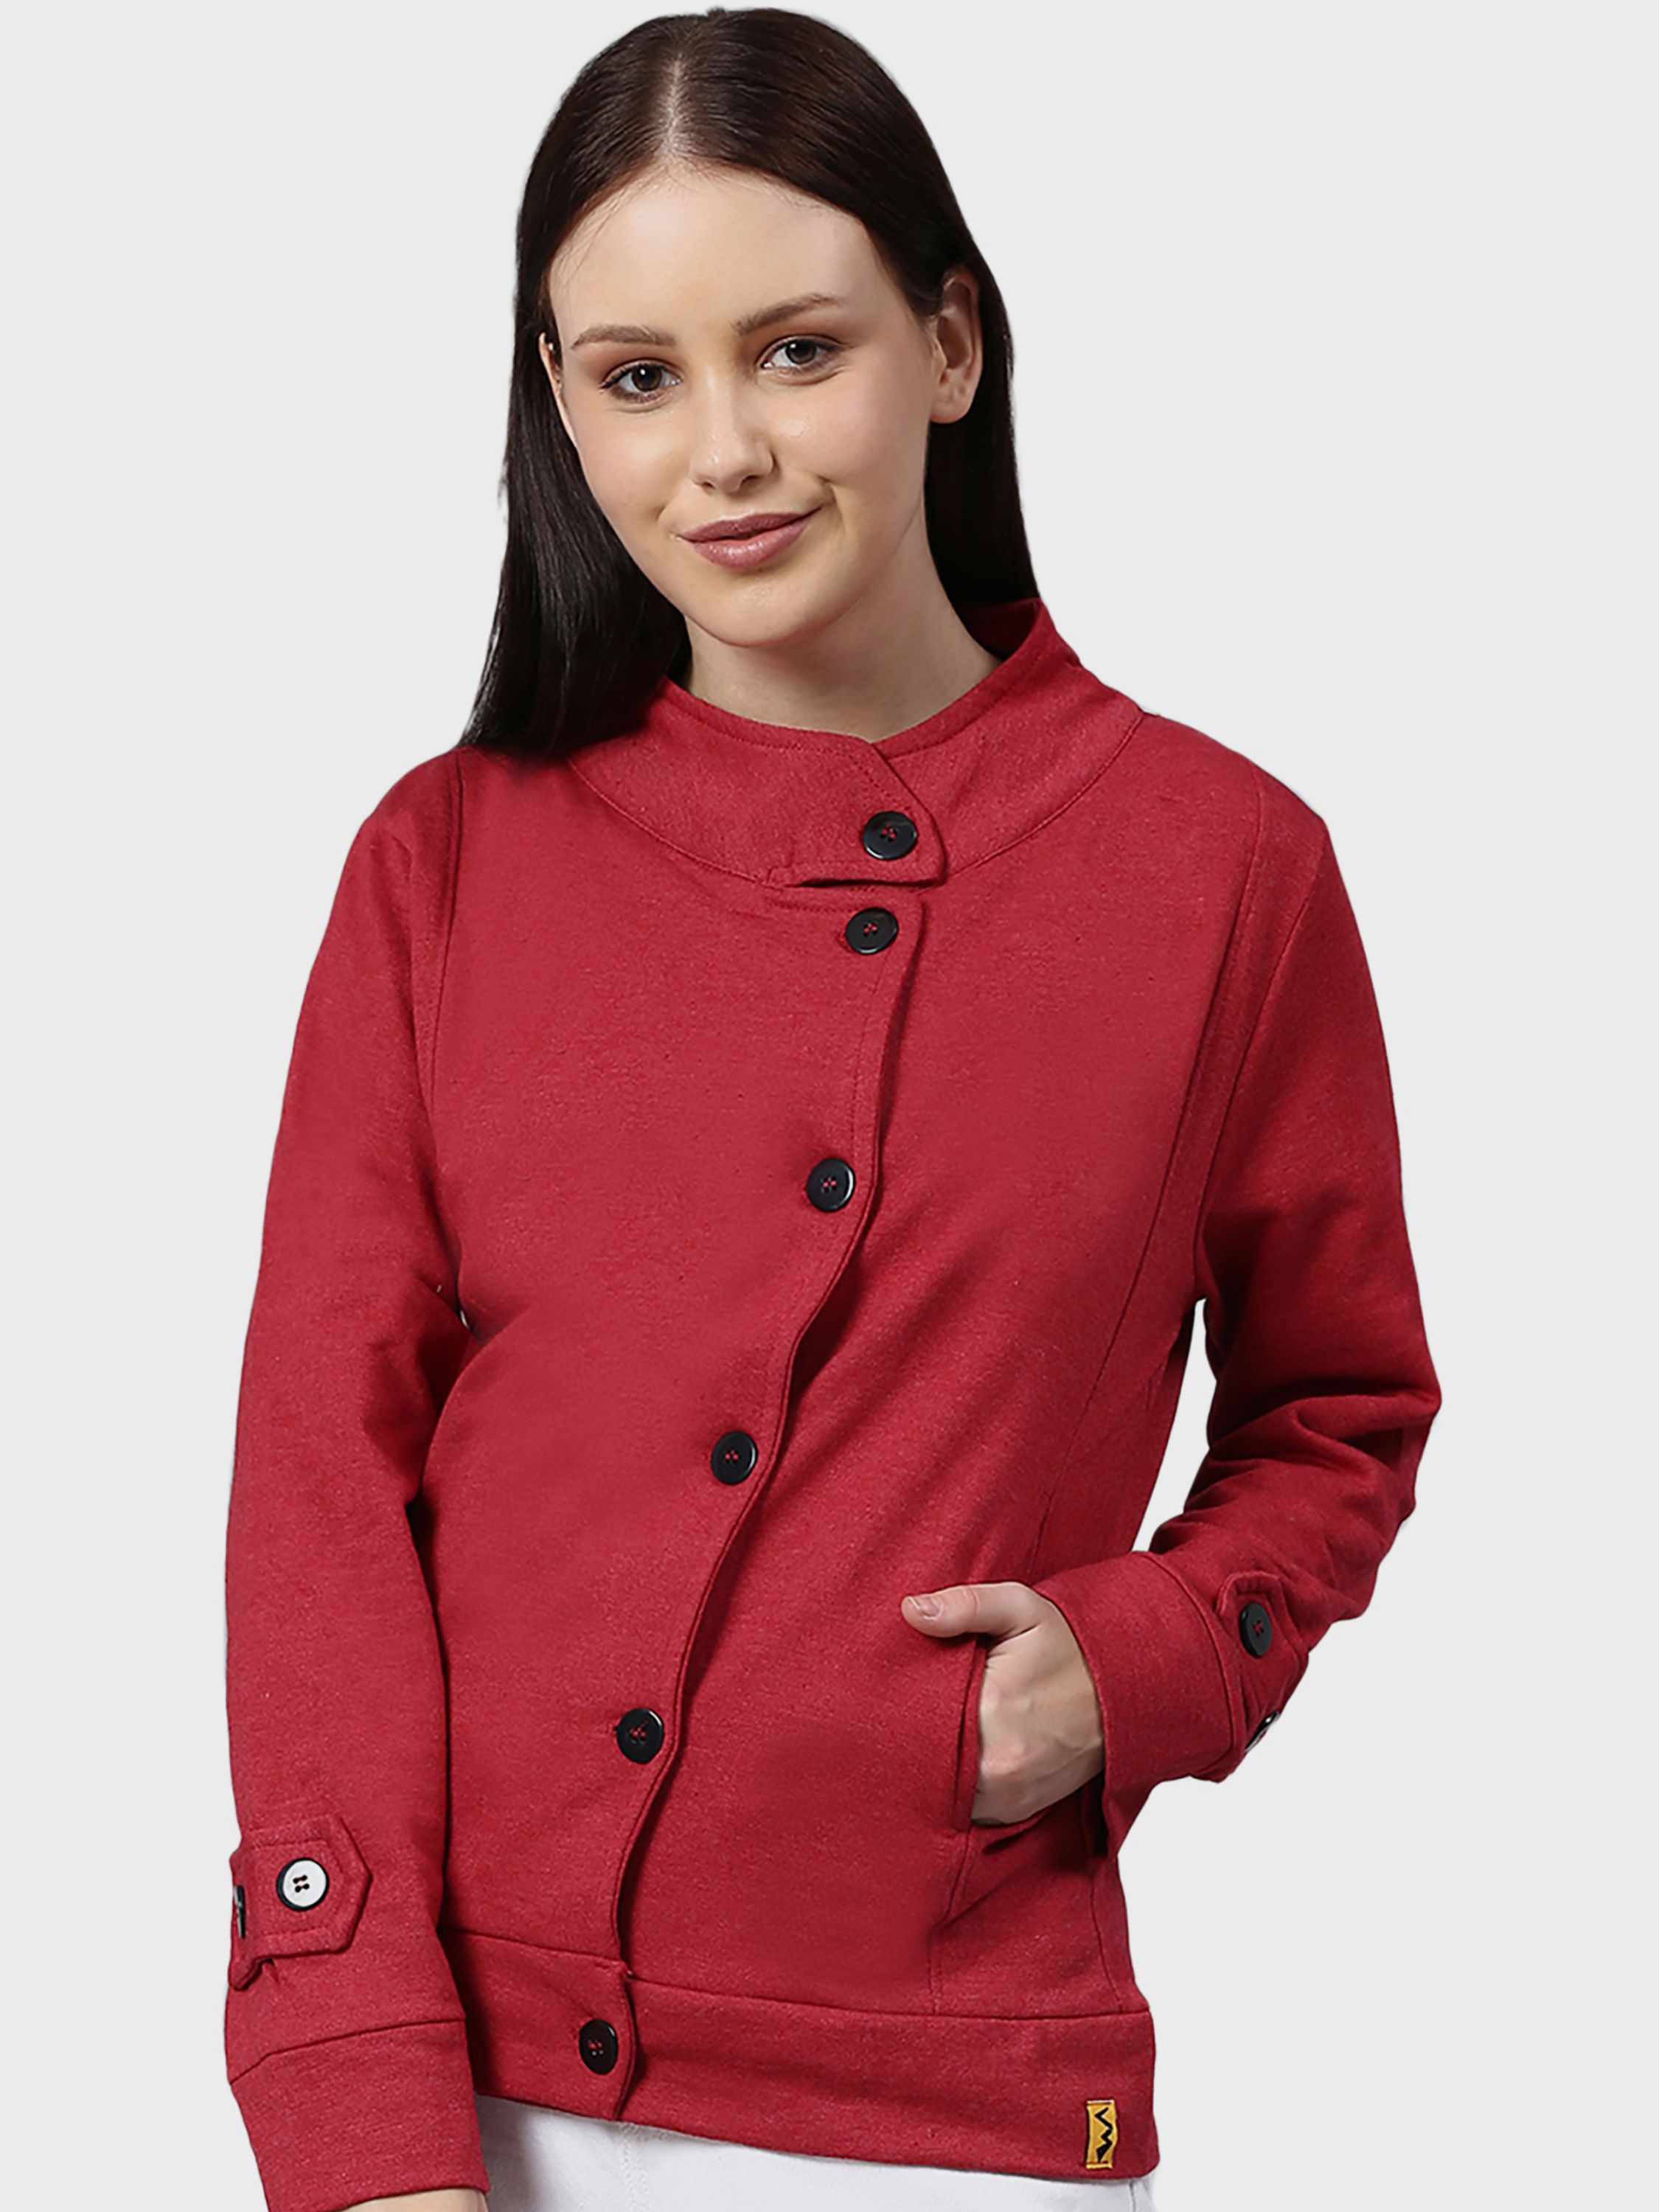 Women Solid Stylish Casual Red Color Jacket